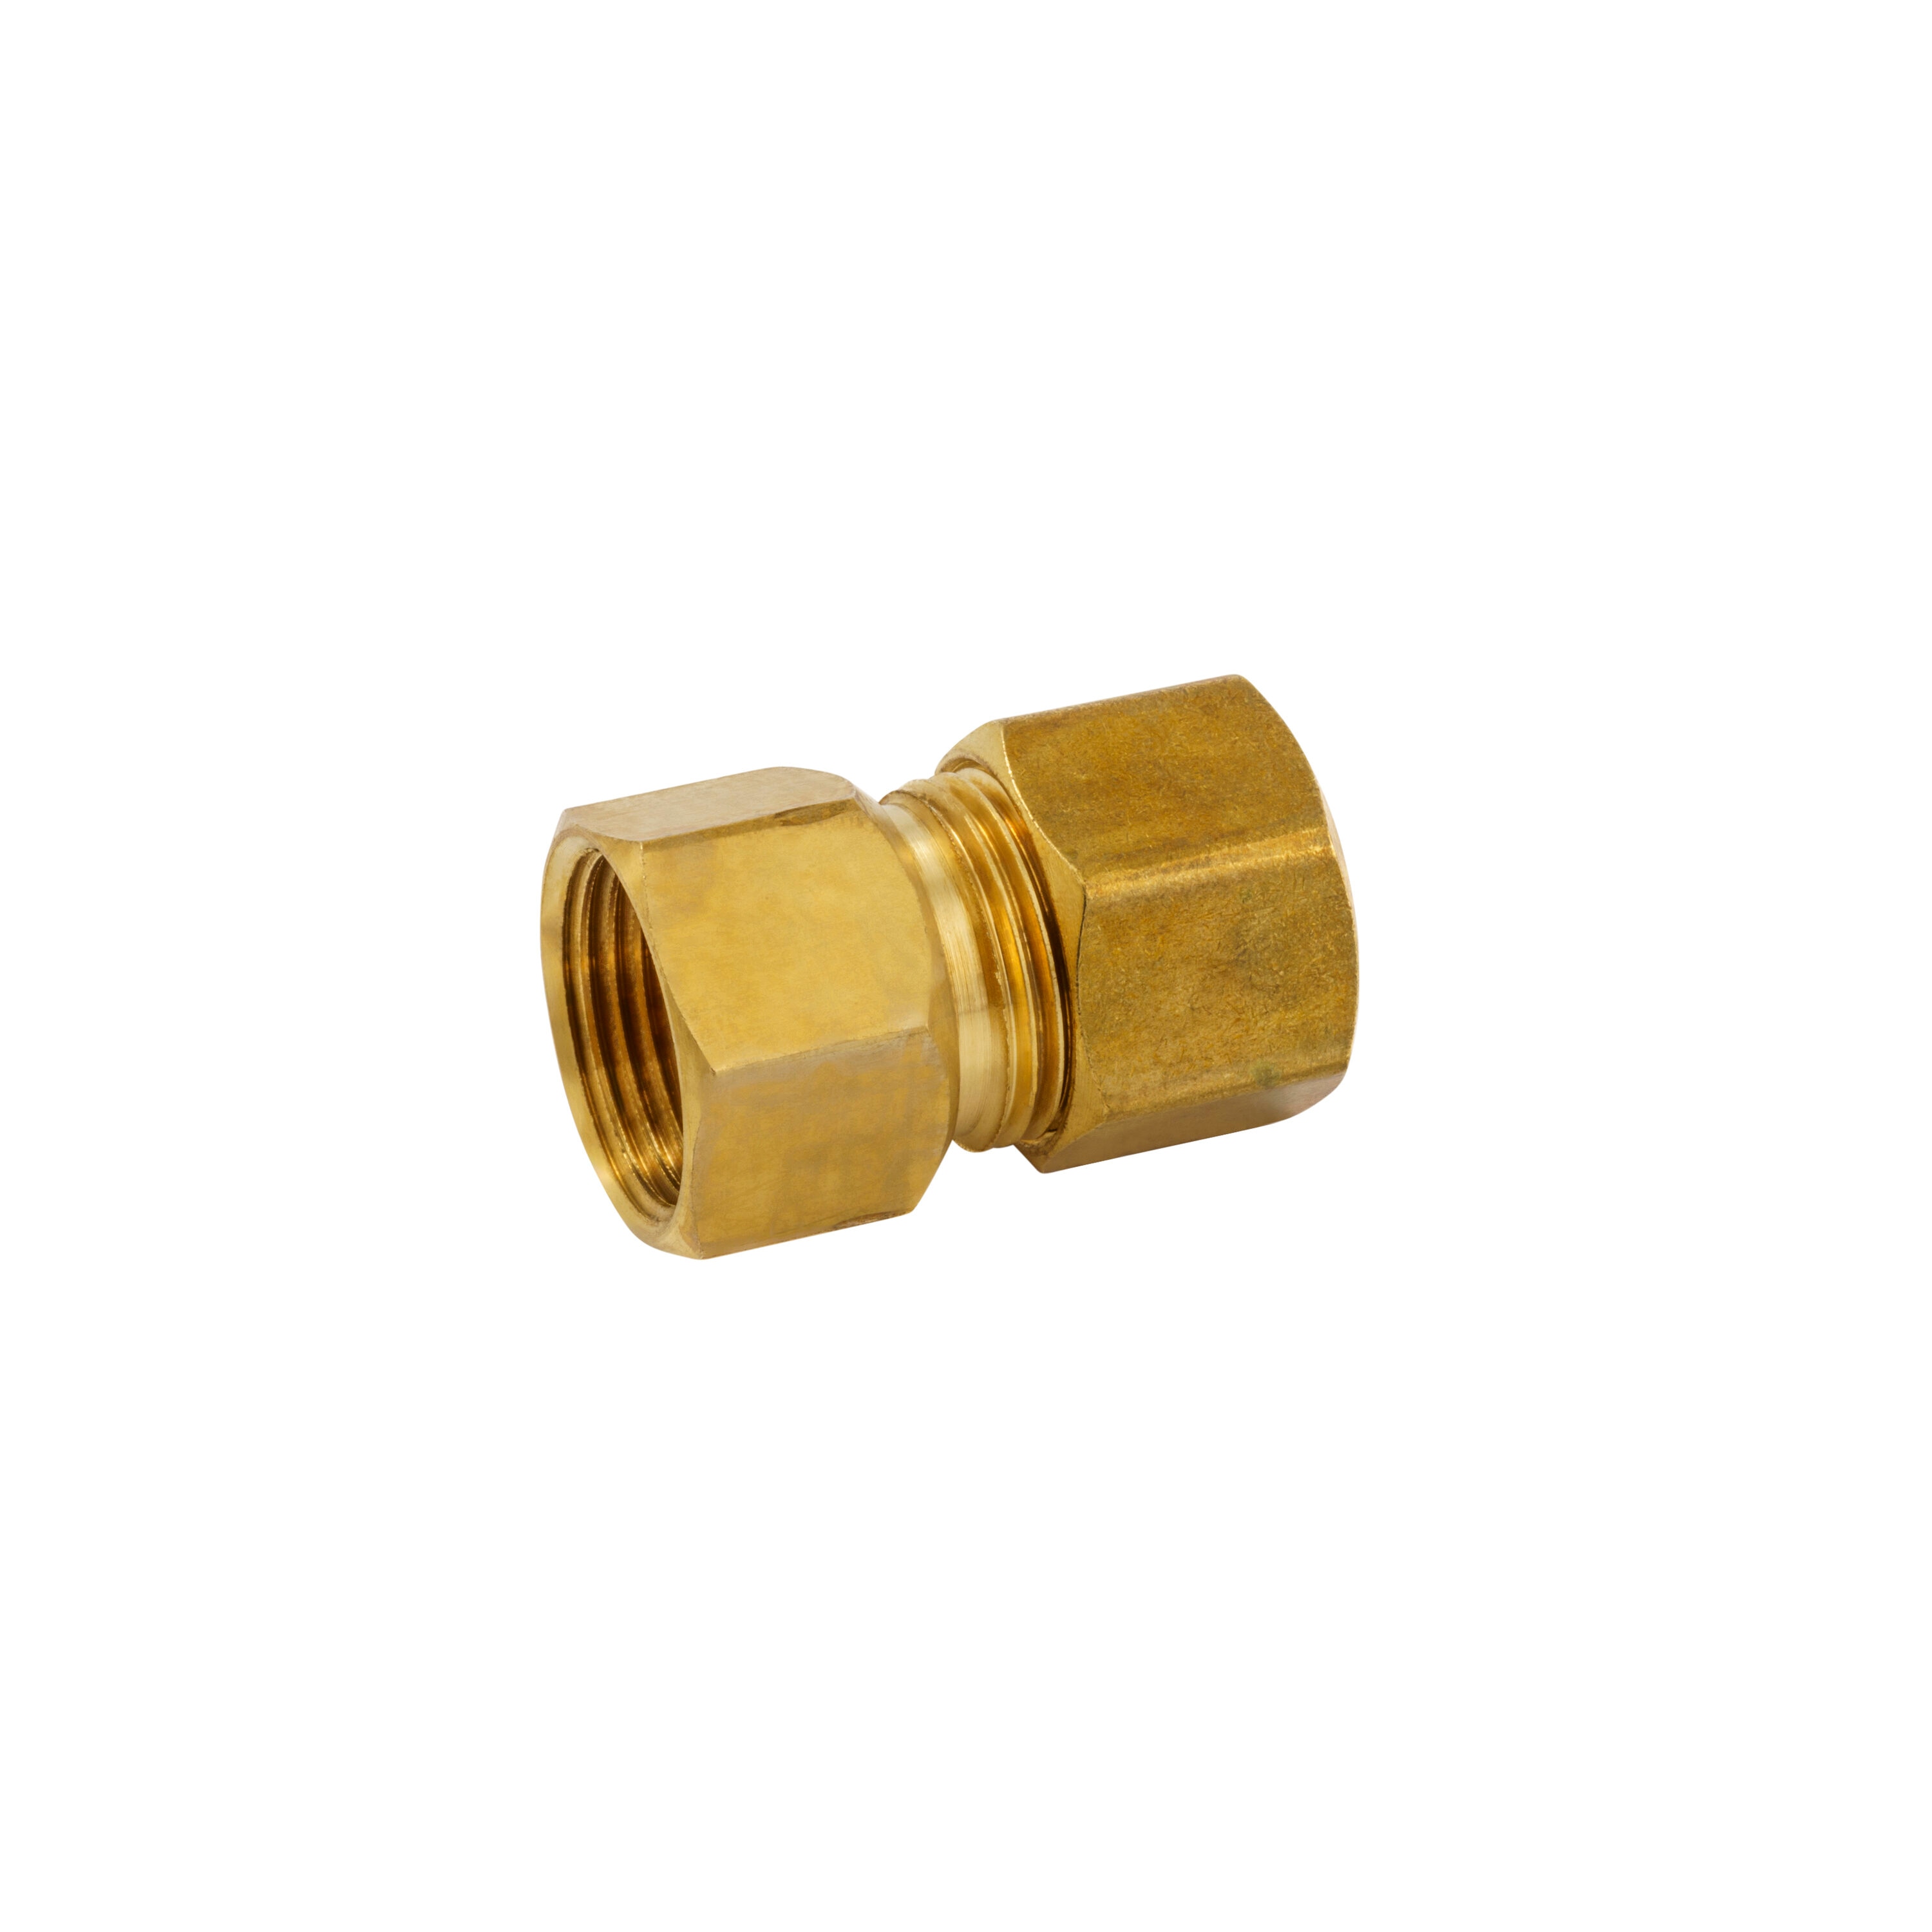 37 Degree Flare Fittings  Brass/ Stainless Steel Flare Plug